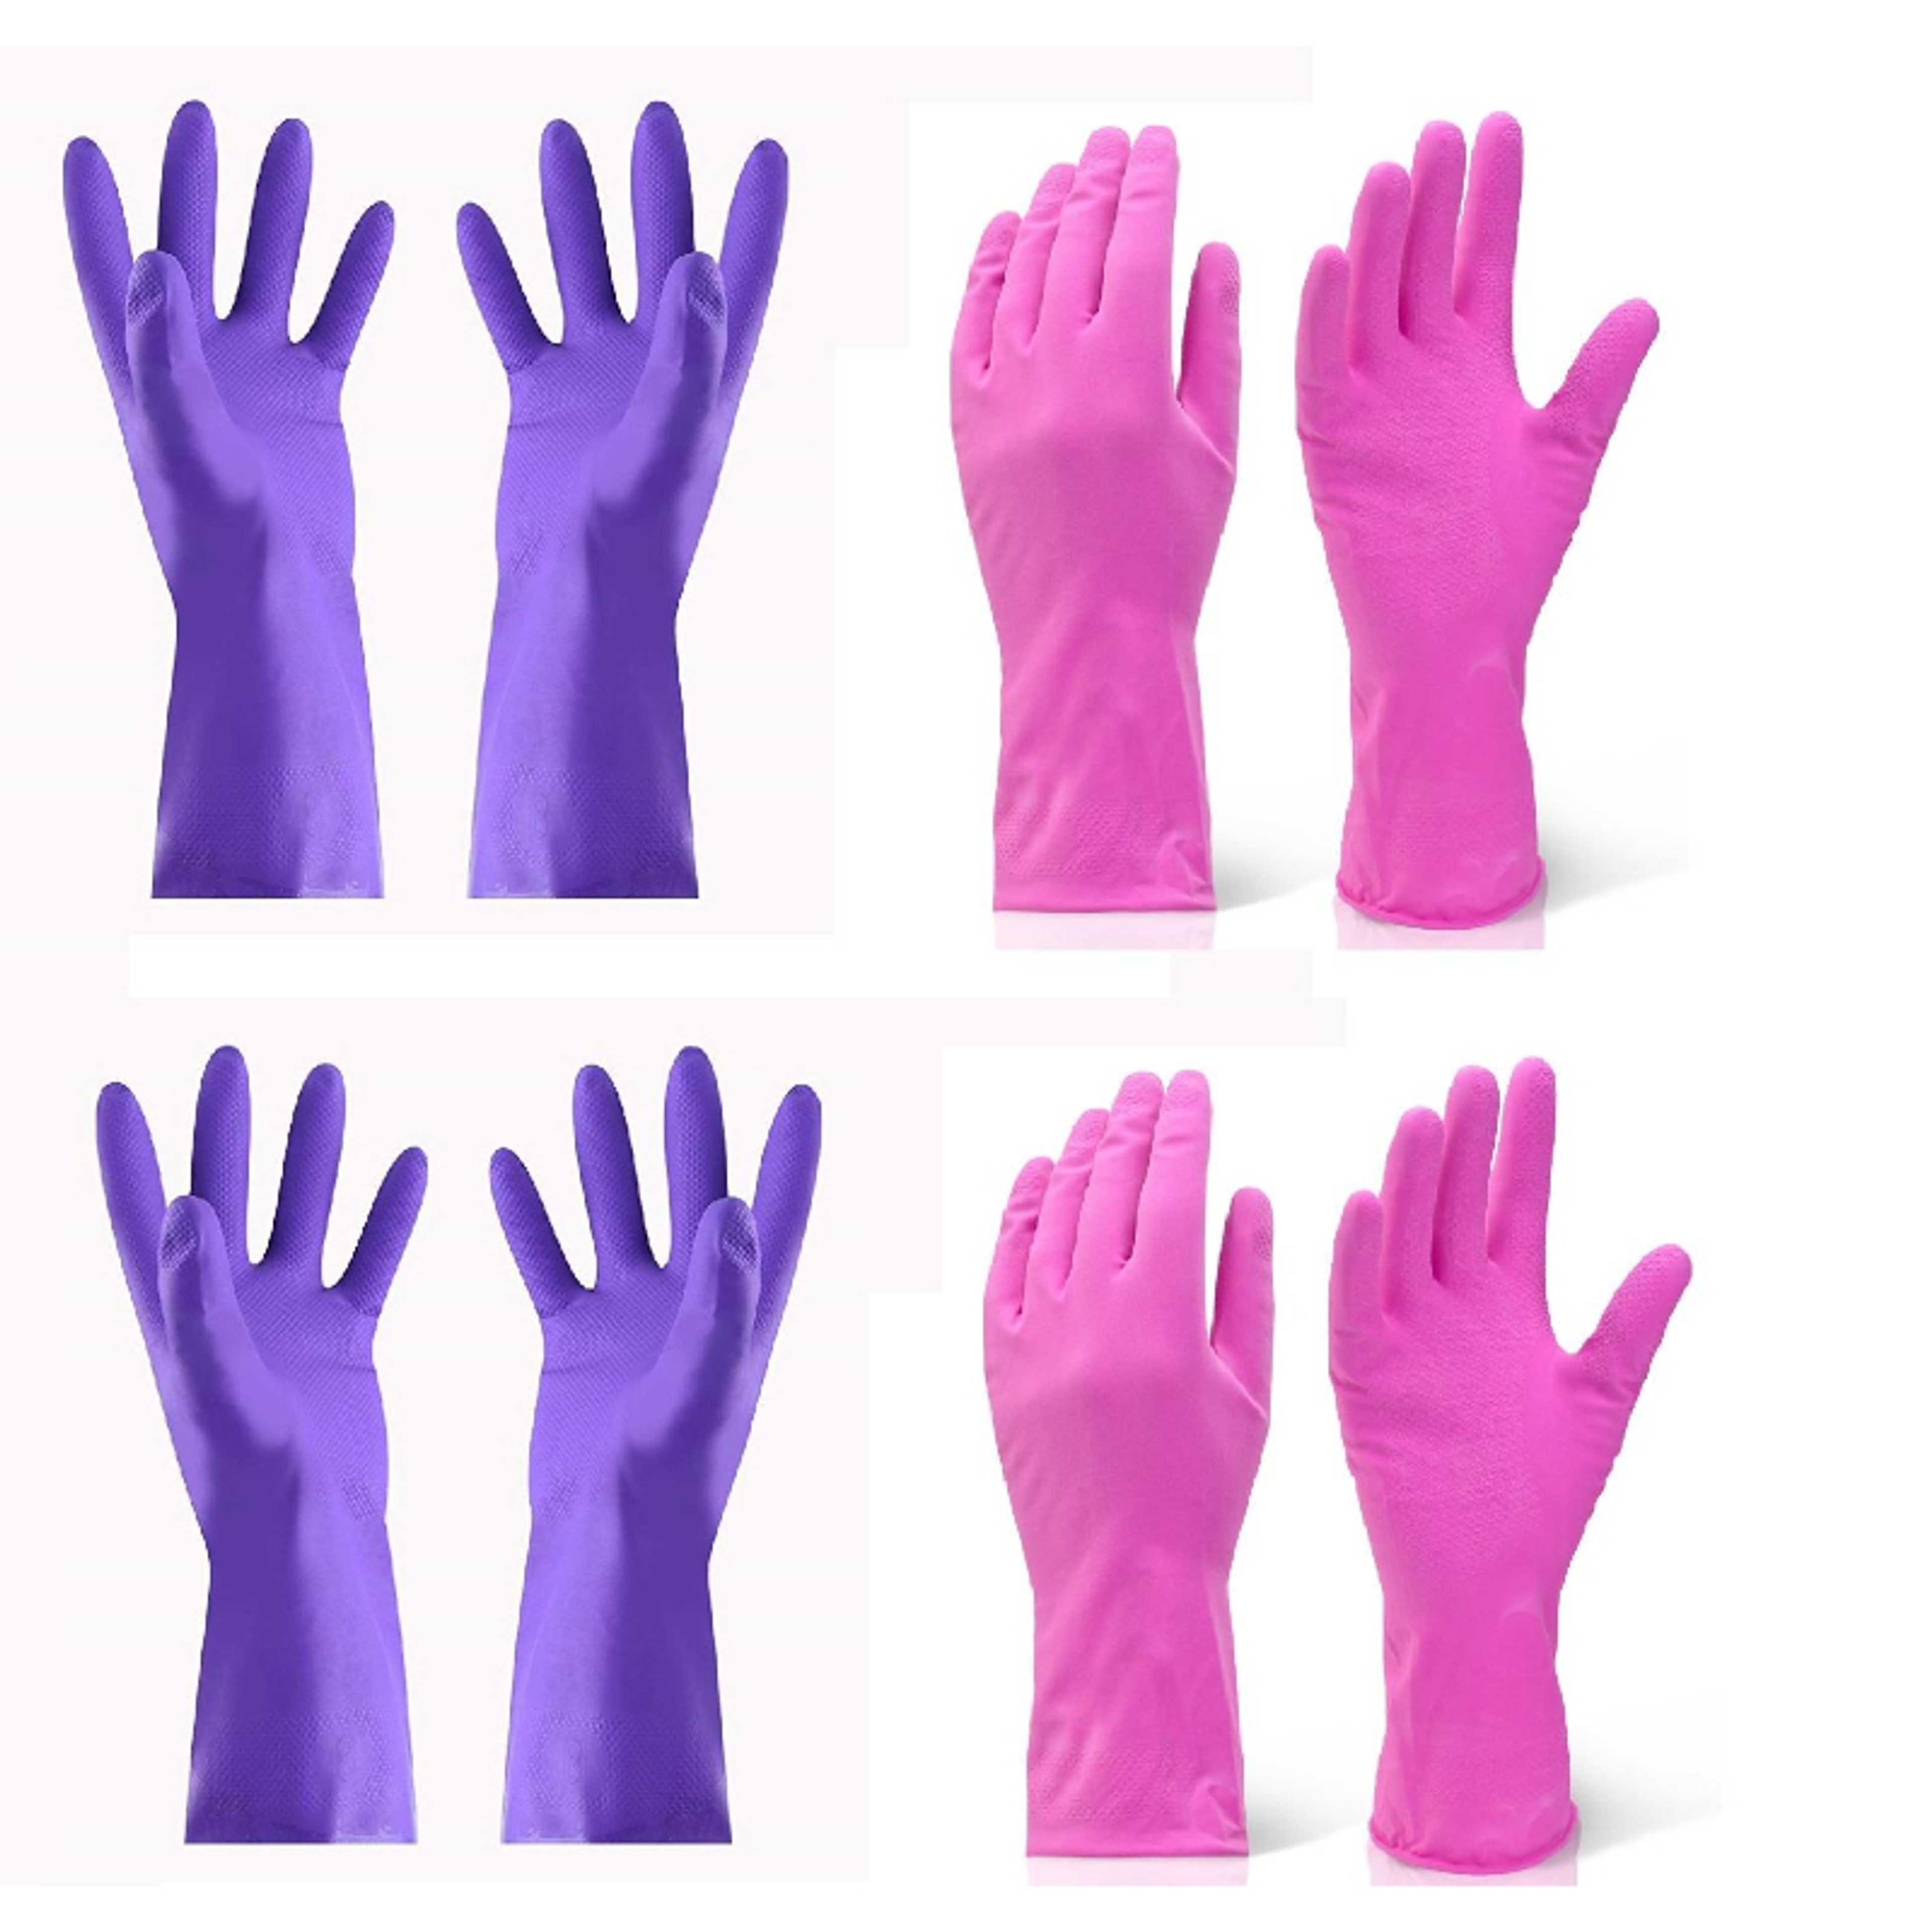 4 Pairs Household Gloves Non Latex and Fit Your Hands Well Great Kitchen Tools